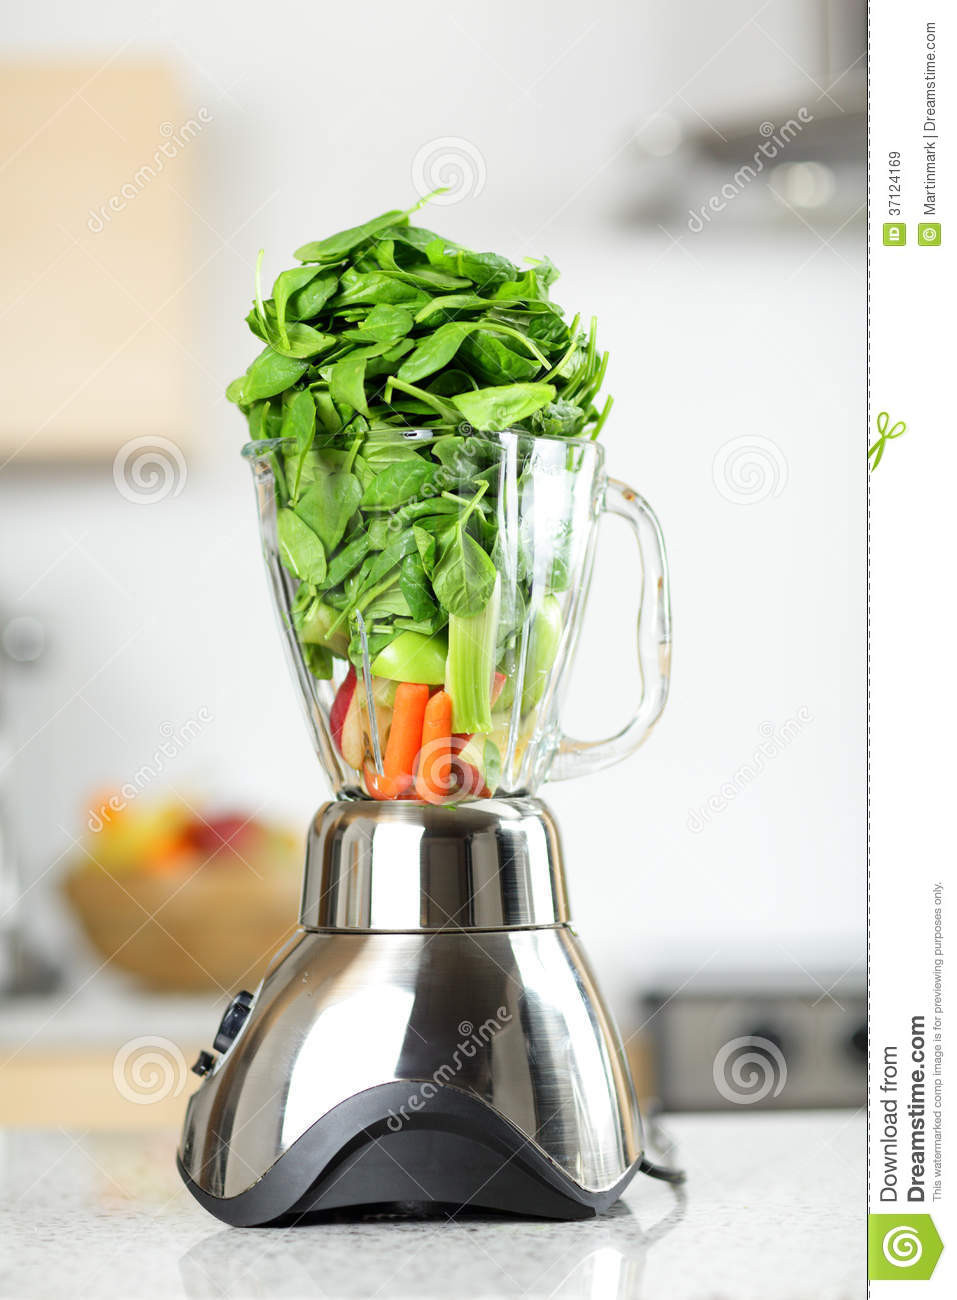 Healthy Blender Smoothies
 Green Ve able Smoothie In Blender Royalty Free Stock